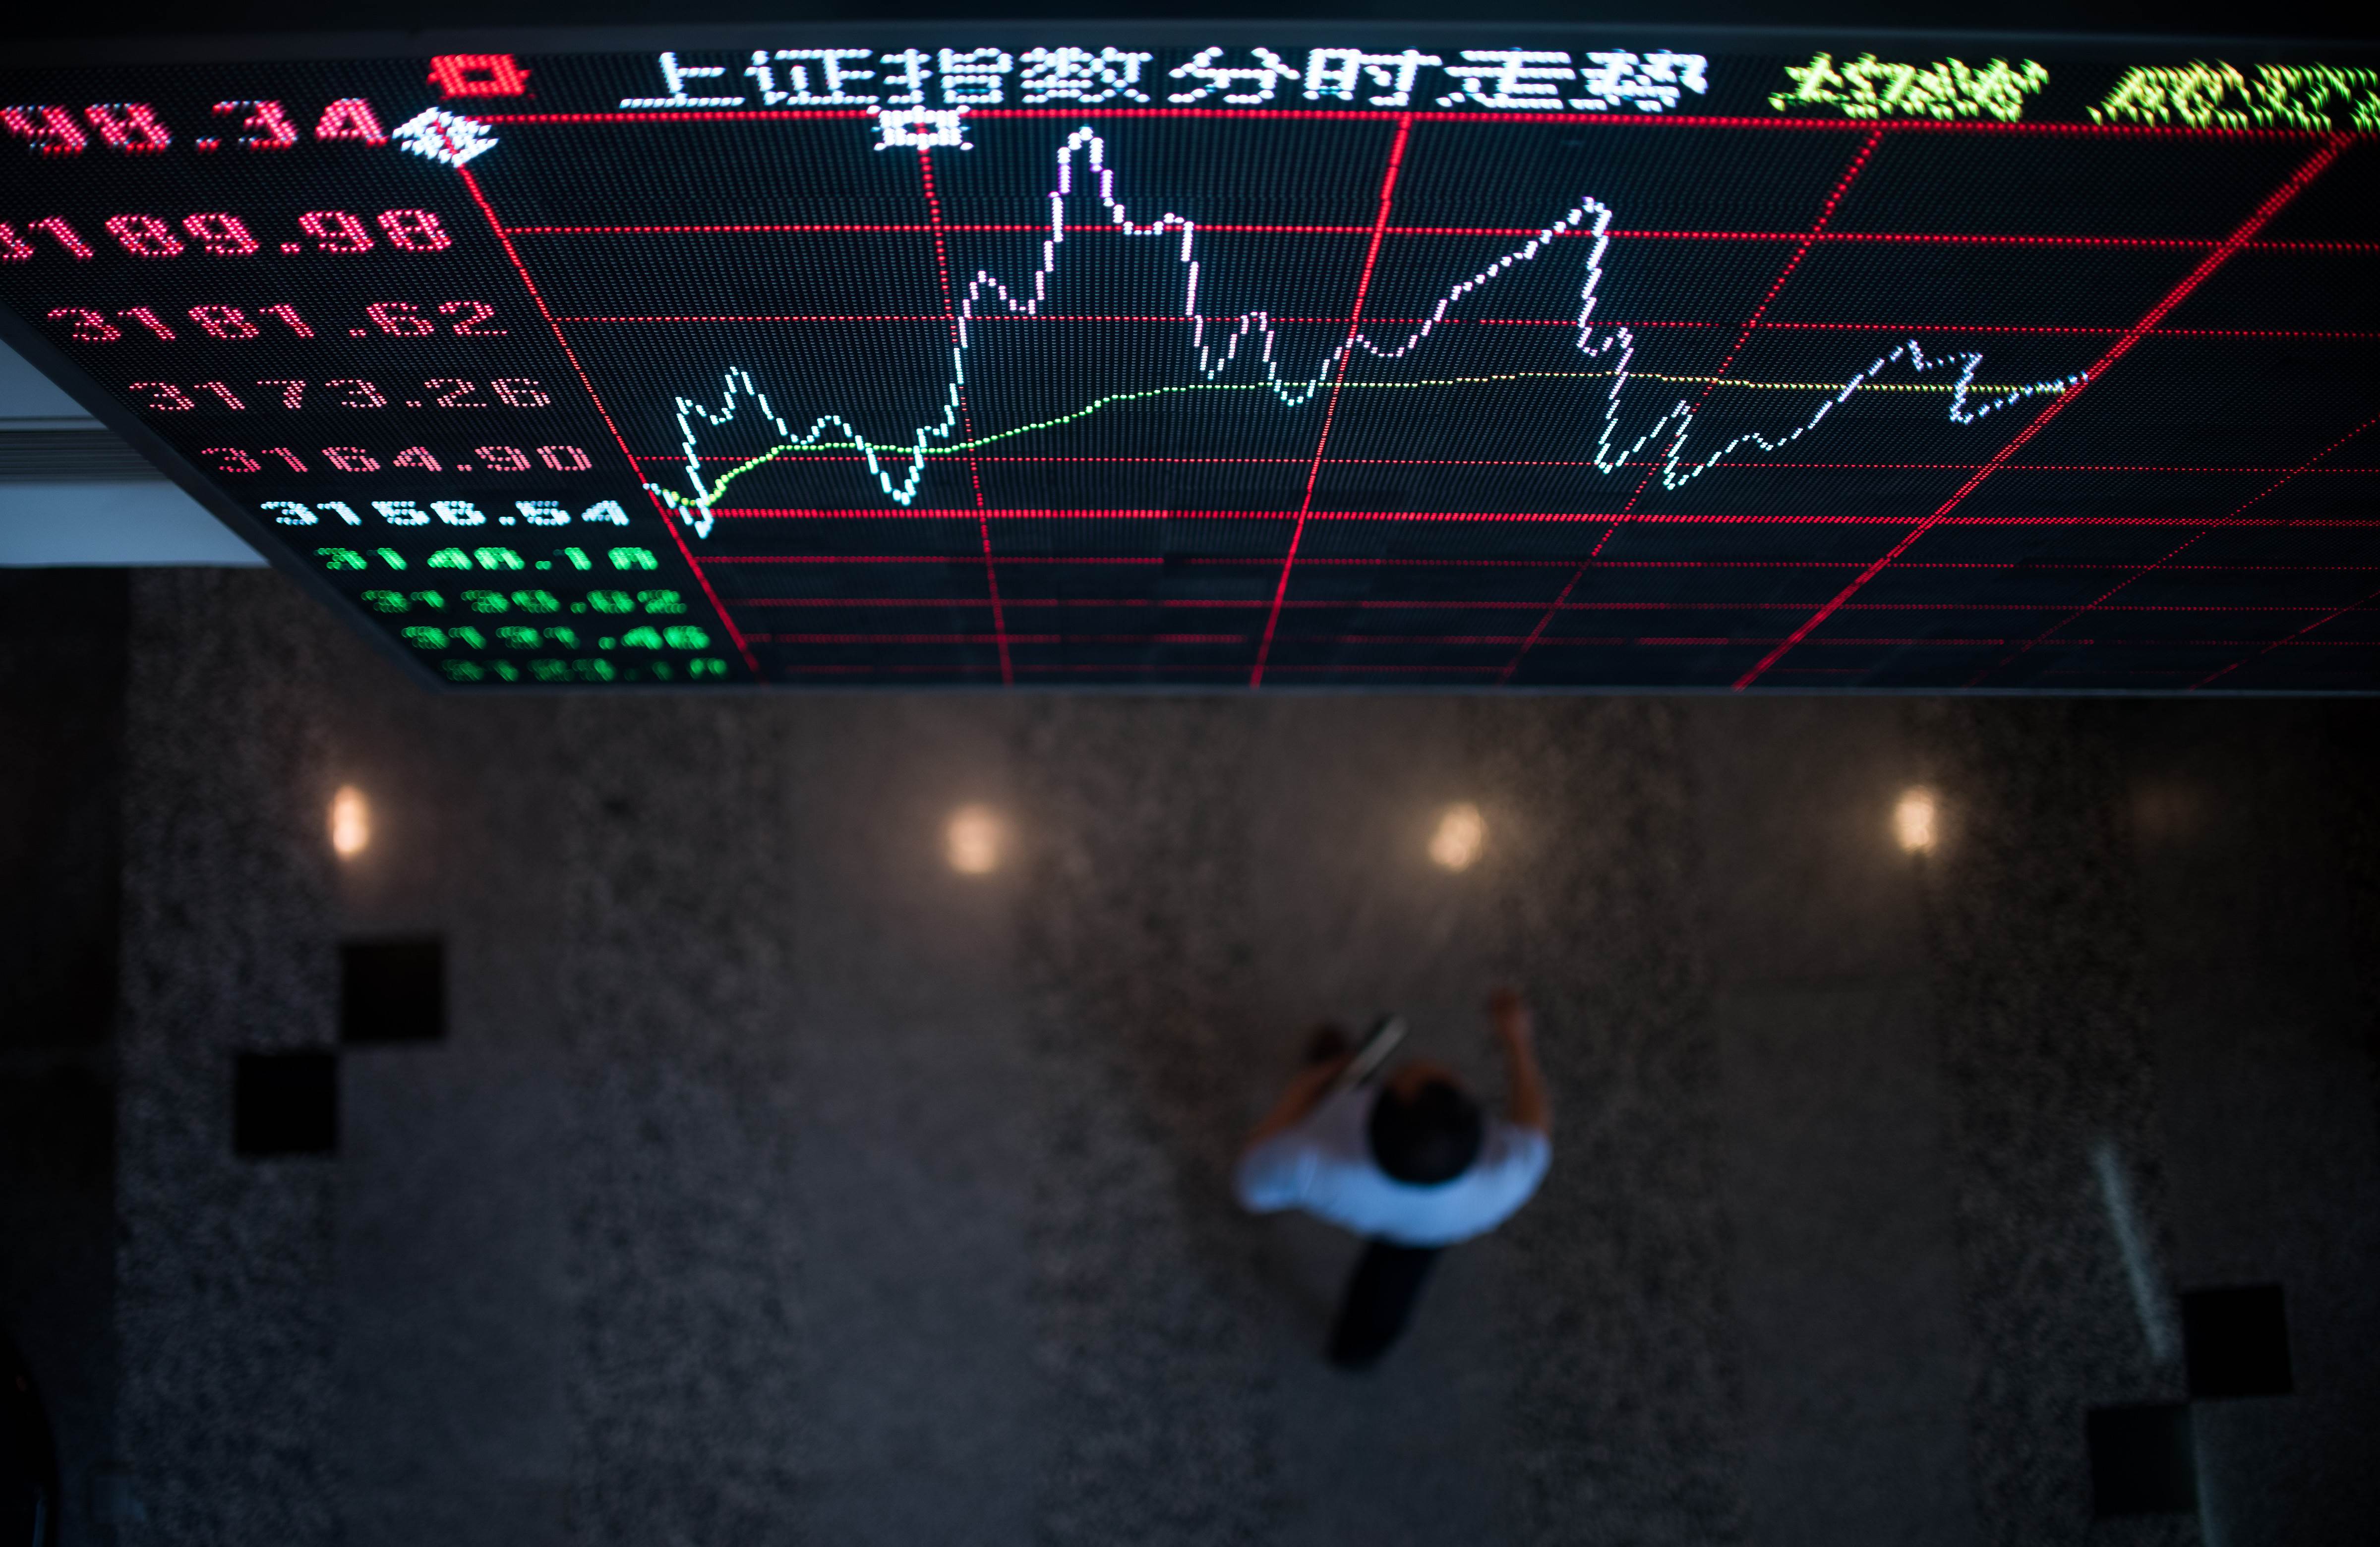 A man speaks to another investor in front of an electronic board showing stock information at a brokerage house in Hangzhou, Zhejiang province, China, September 25, 2015. China stocks fell on Friday, led by a selloff in small caps, as the main indexes ended the week roughly flat in shrinking trading volume. REUTERS/China Daily CHINA OUT. NO COMMERCIAL OR EDITORIAL SALES IN CHINA